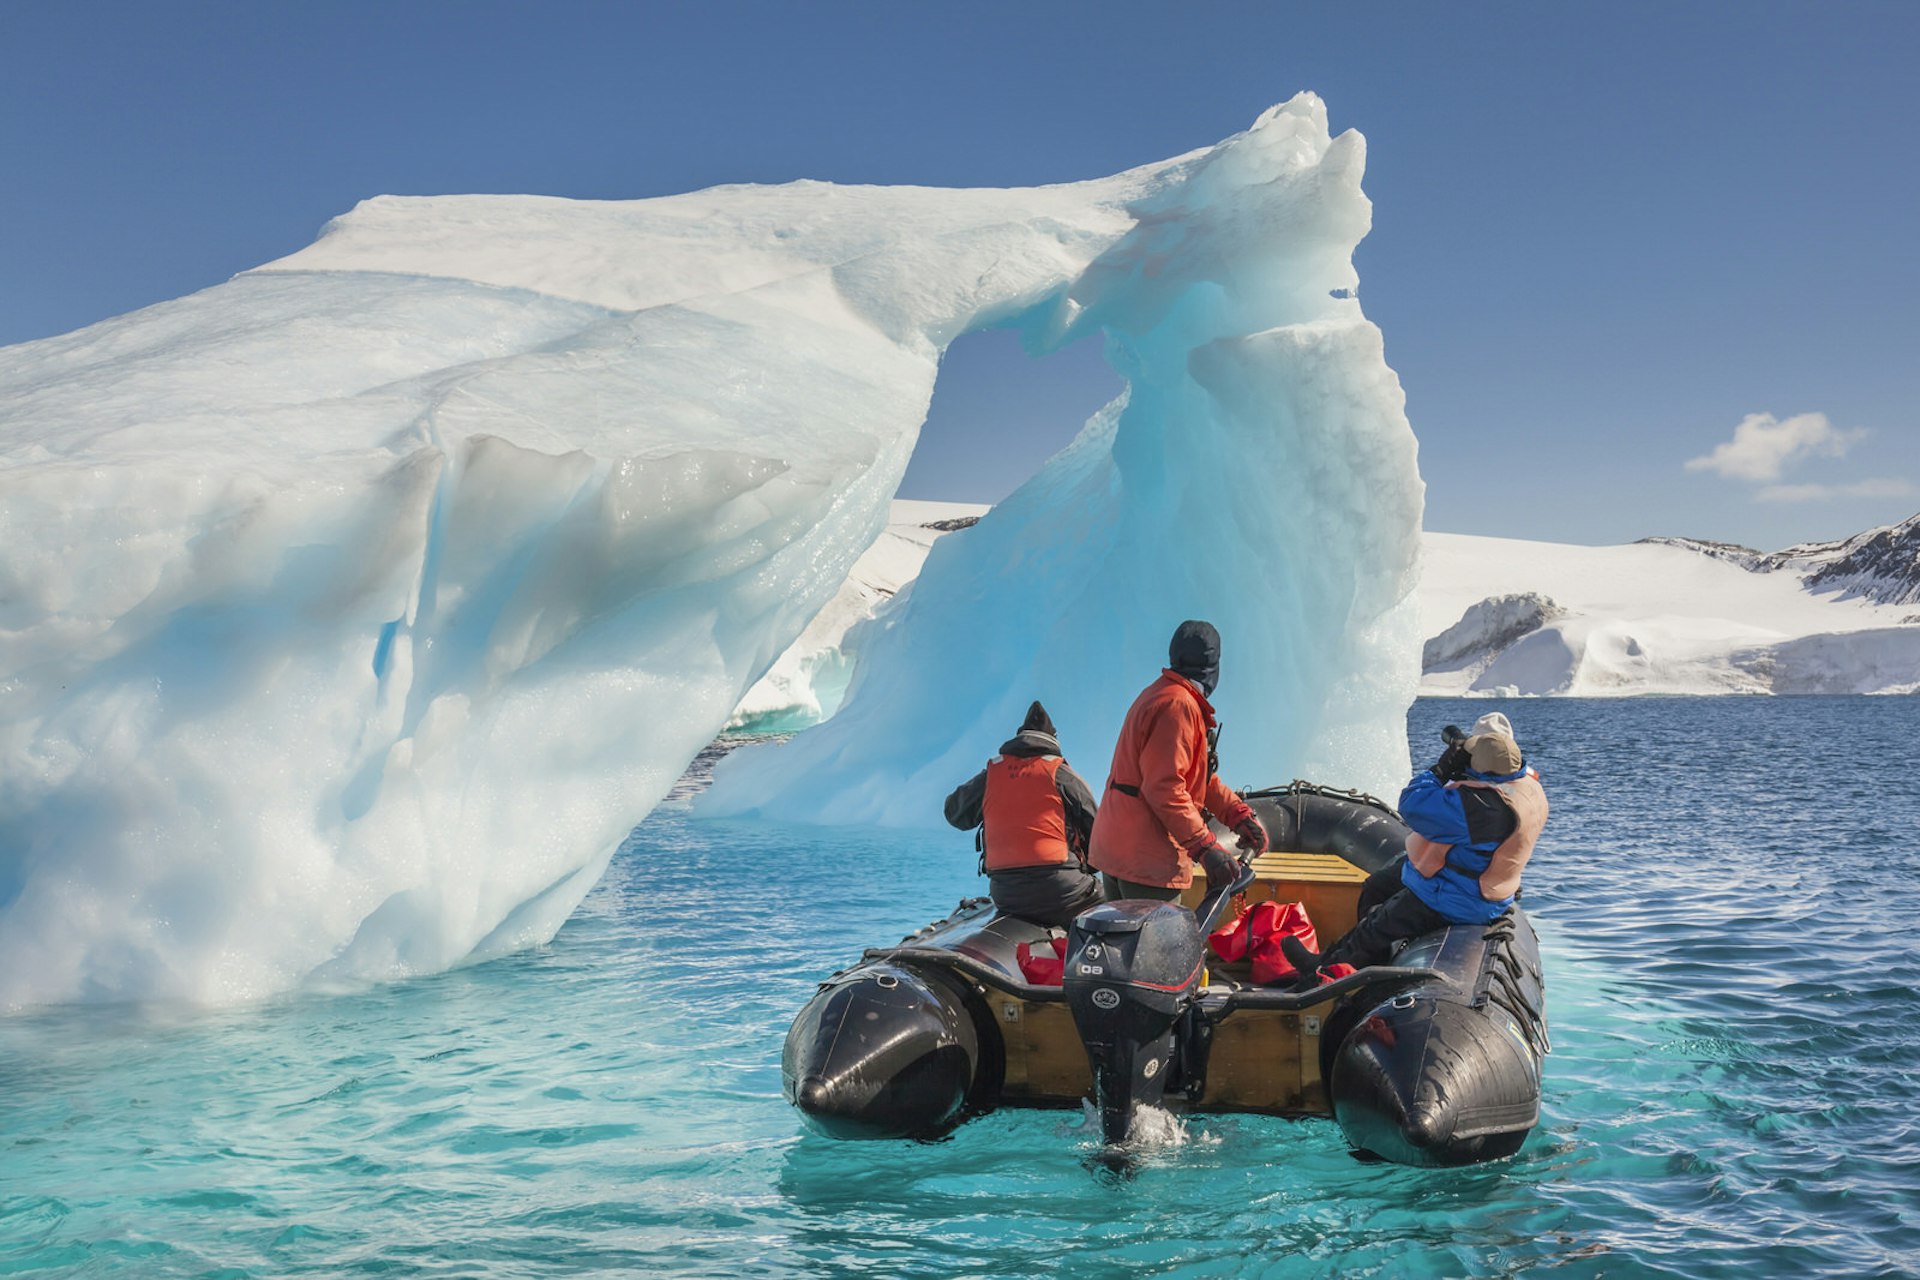 Tourists on a Zodiac exploring the icebergs of the Antarctic Peninsula © Patrick Endres / Getty Images